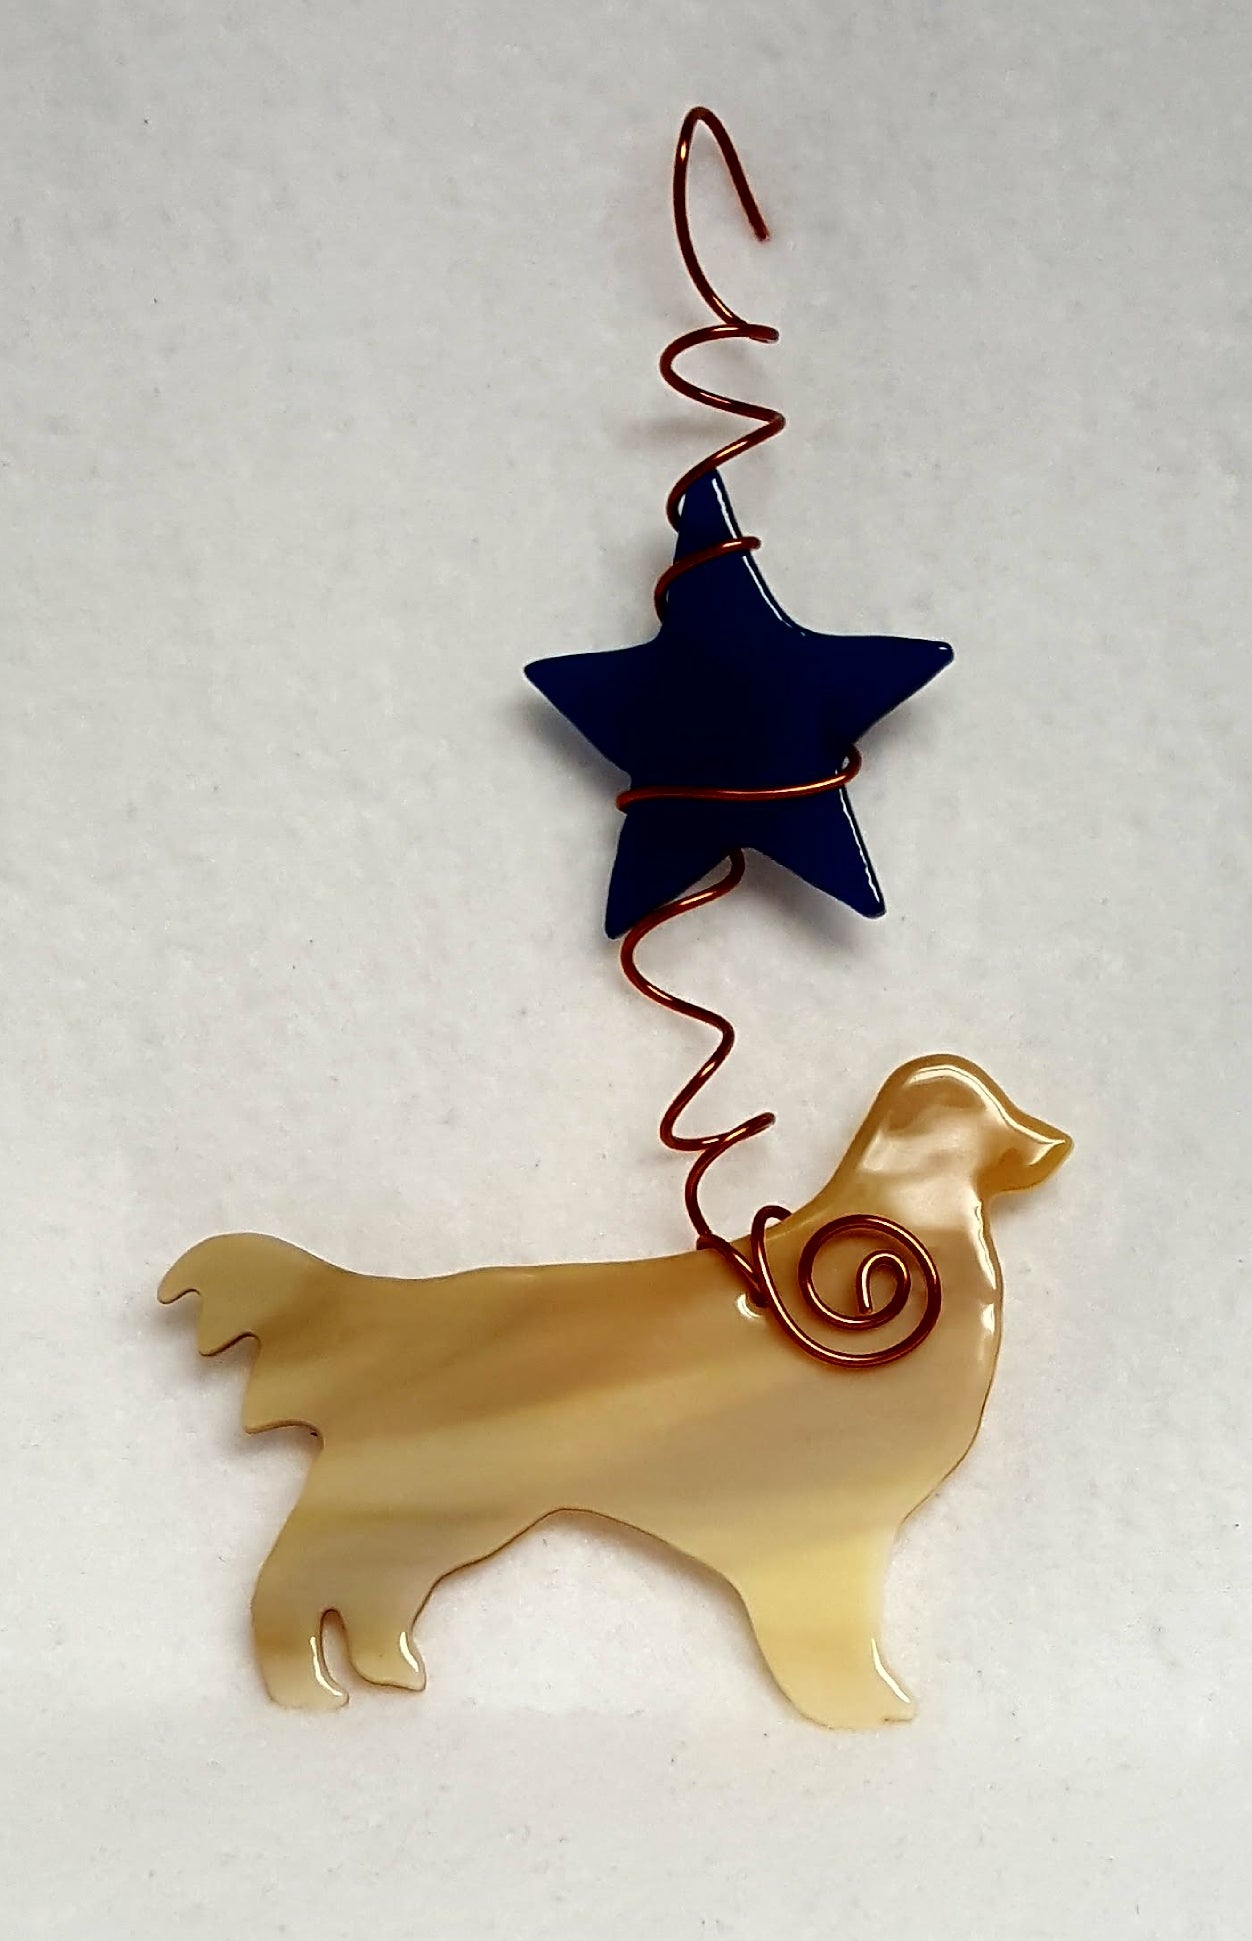 Golden retrievers are known for their happy playful personalities, this one likes to be under a deep blue star. Suncatcher hangs 7 inches.